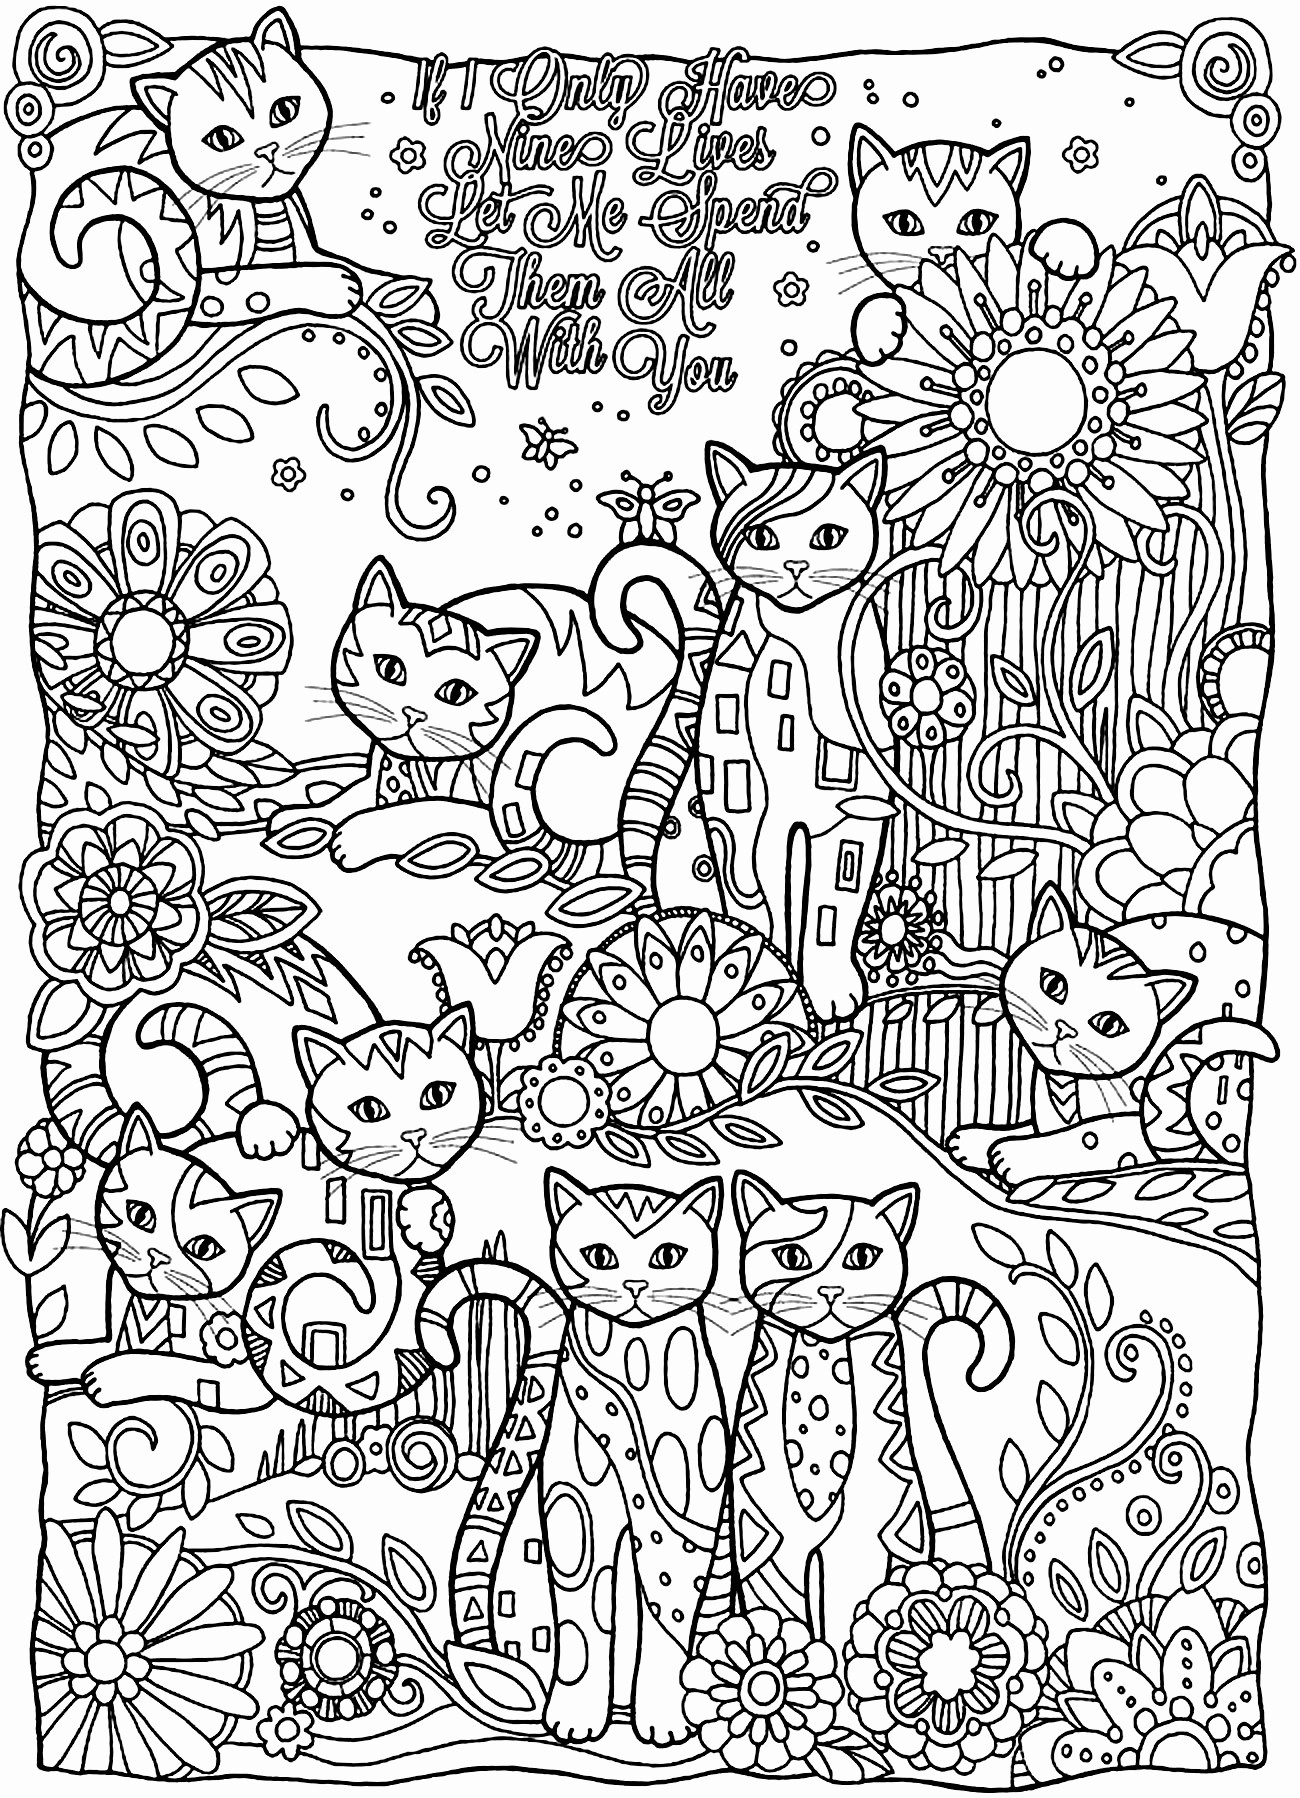 Free Printable Coloring Pages For Adults Only Easy New - Free Printable Coloring Pages For Adults Only